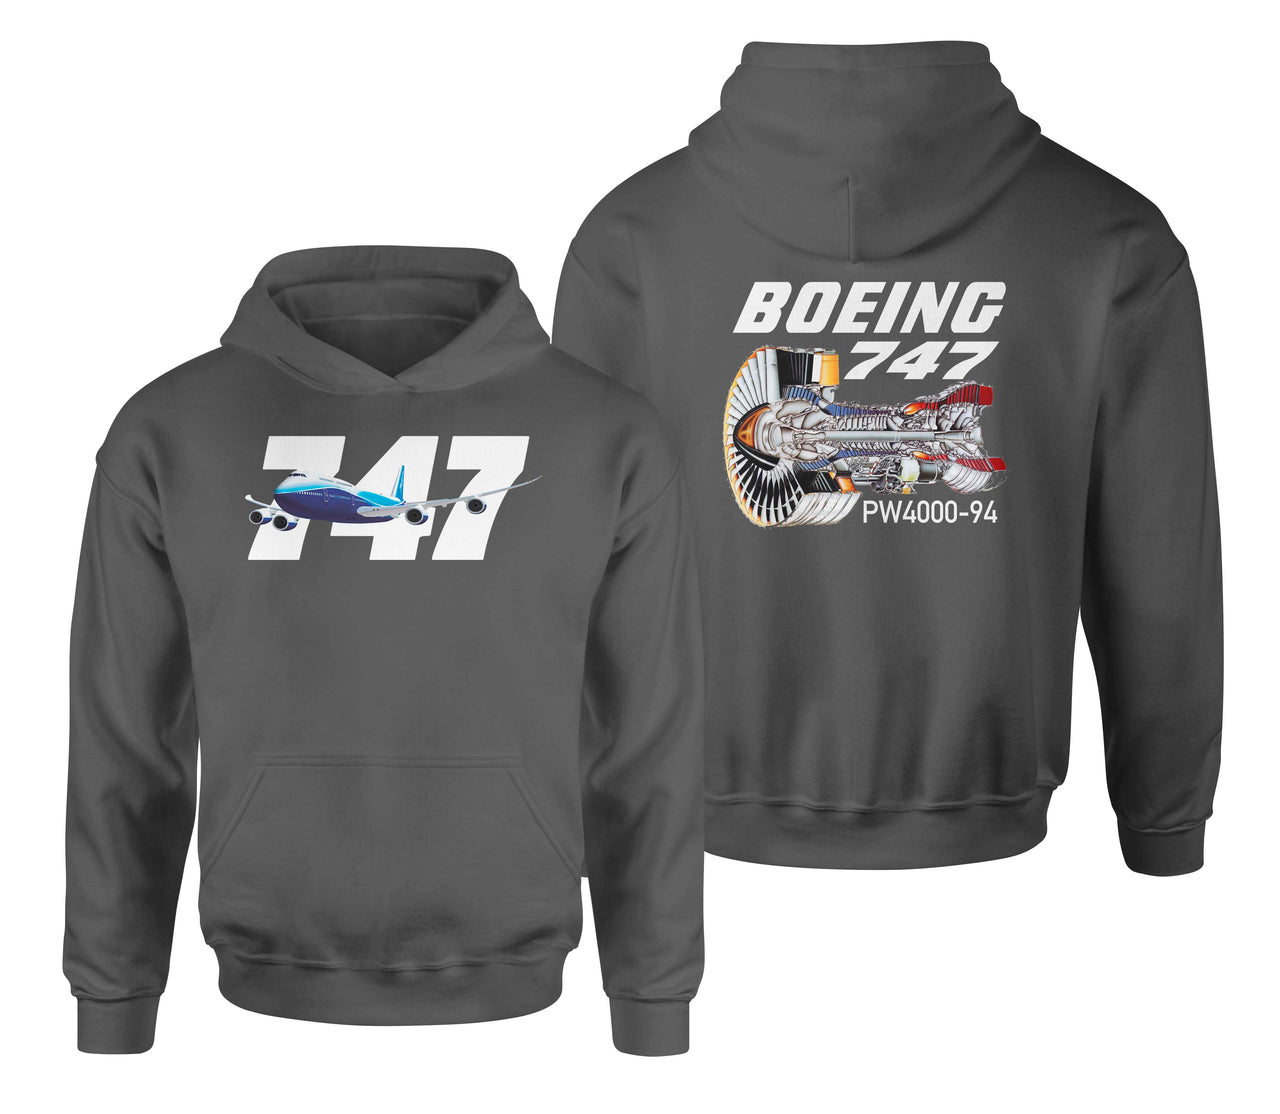 Boeing 747 & PW4000-94 Engine Designed Double Side Hoodies